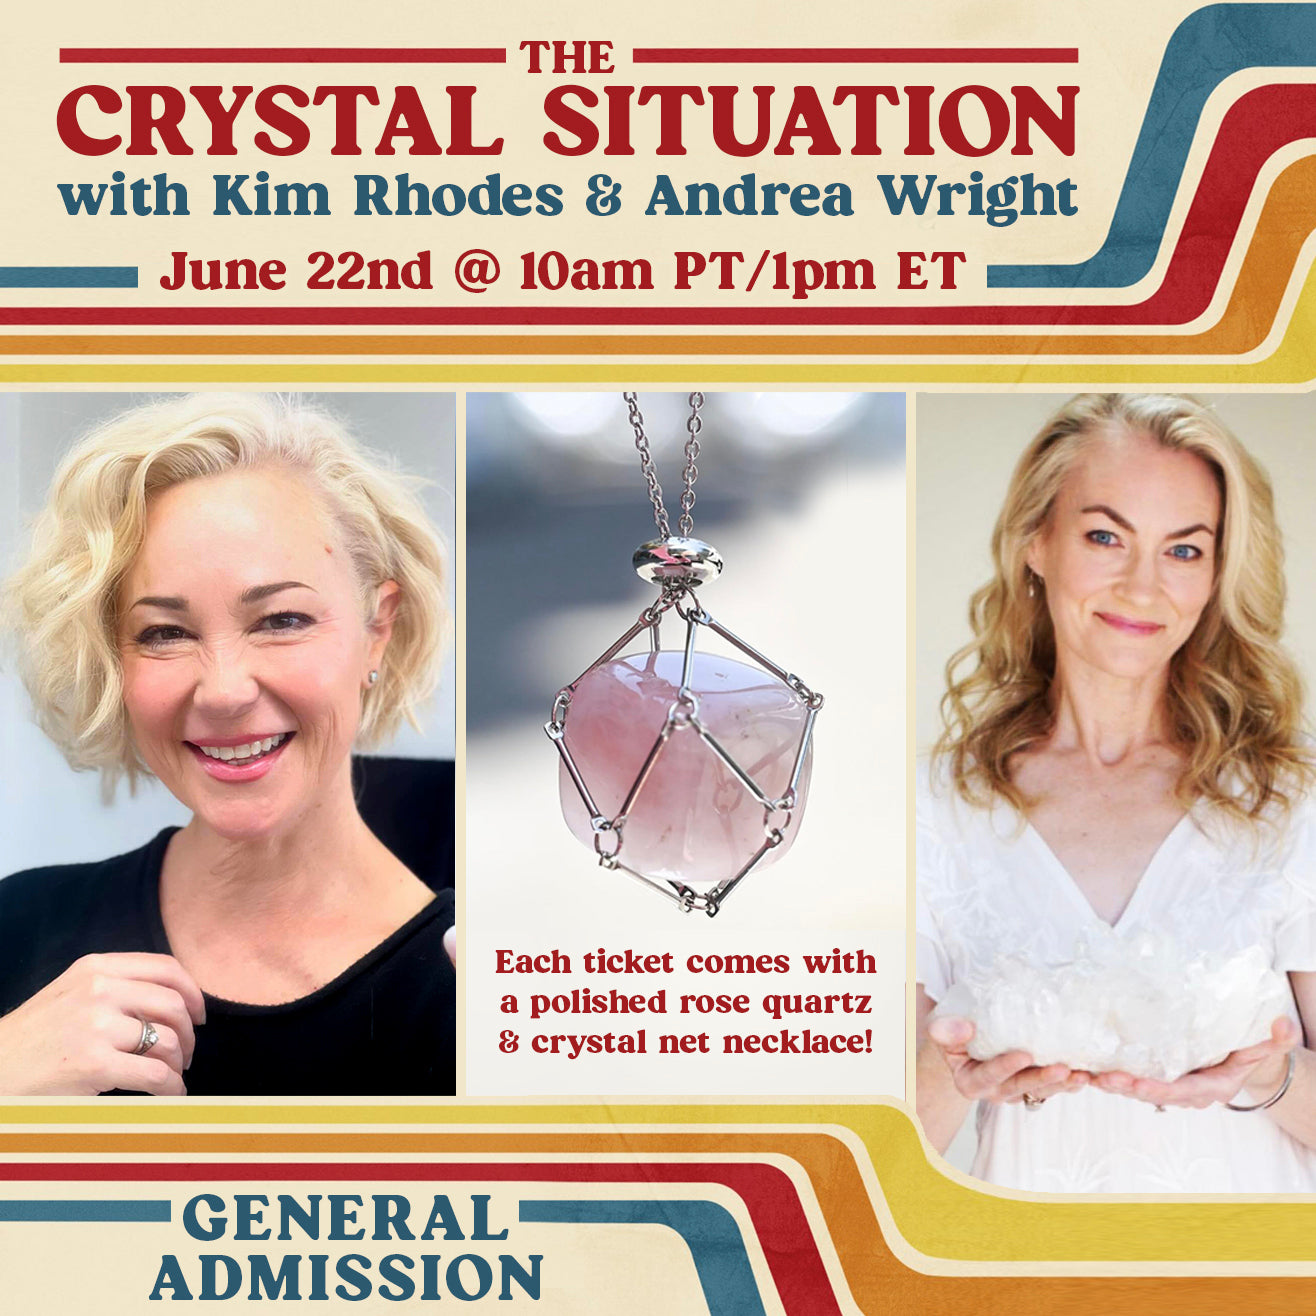 The Crystal Situation with Kim Rhodes & Andrea Wright (General Admission + Gem)